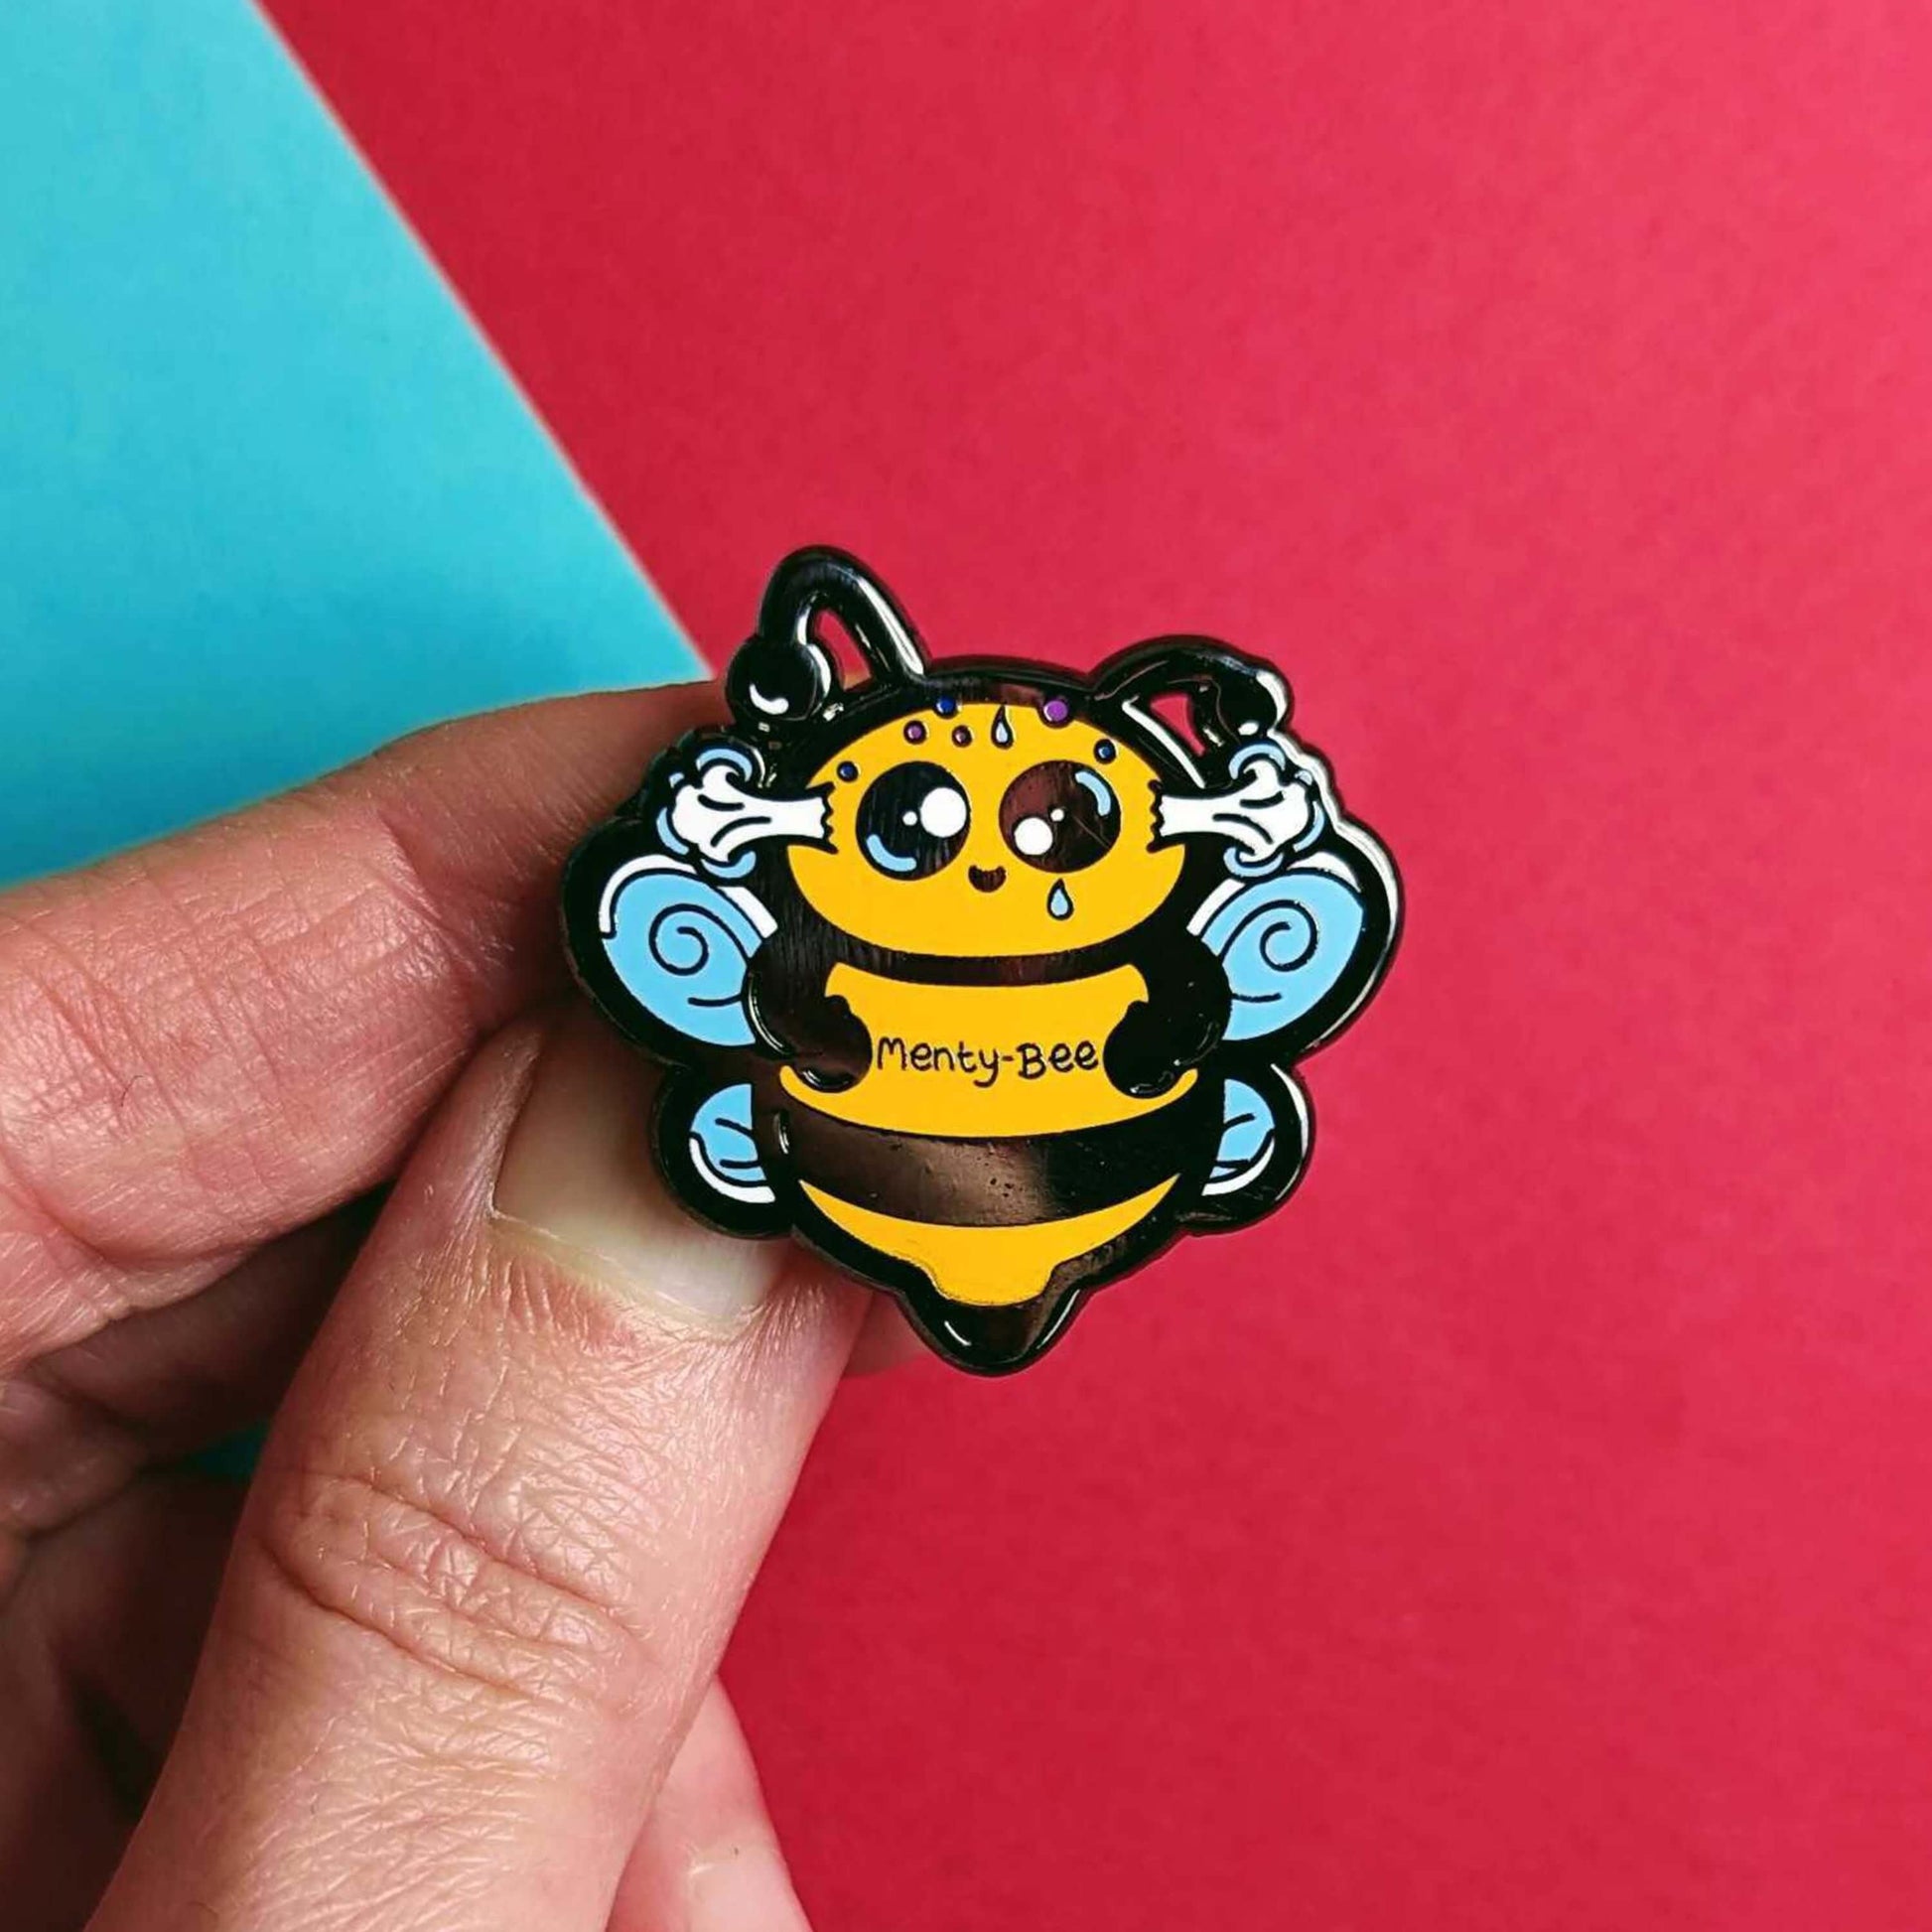 Menty-Bee Enamel Pin - Mental Breakdown held in front of a red and blue background. The enamel pin is of a bee looking stressed with steam coming out of its head and the text menty-Bee on its chest. Hand drawn design made to raise awareness for mental breakdowns